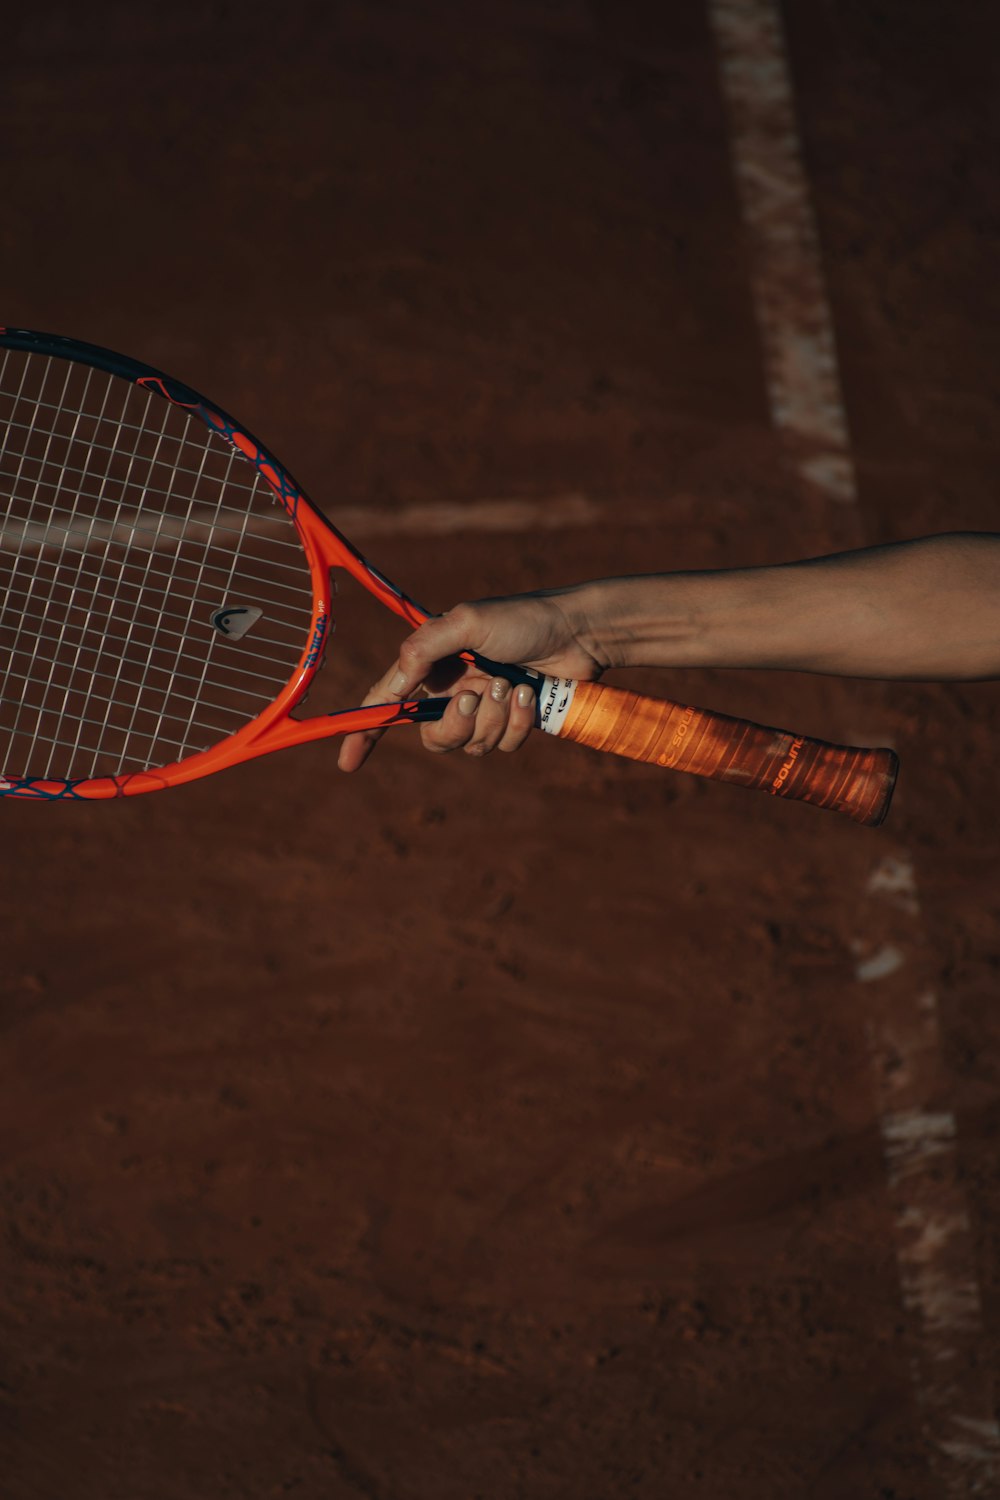 a person holds a tennis racket